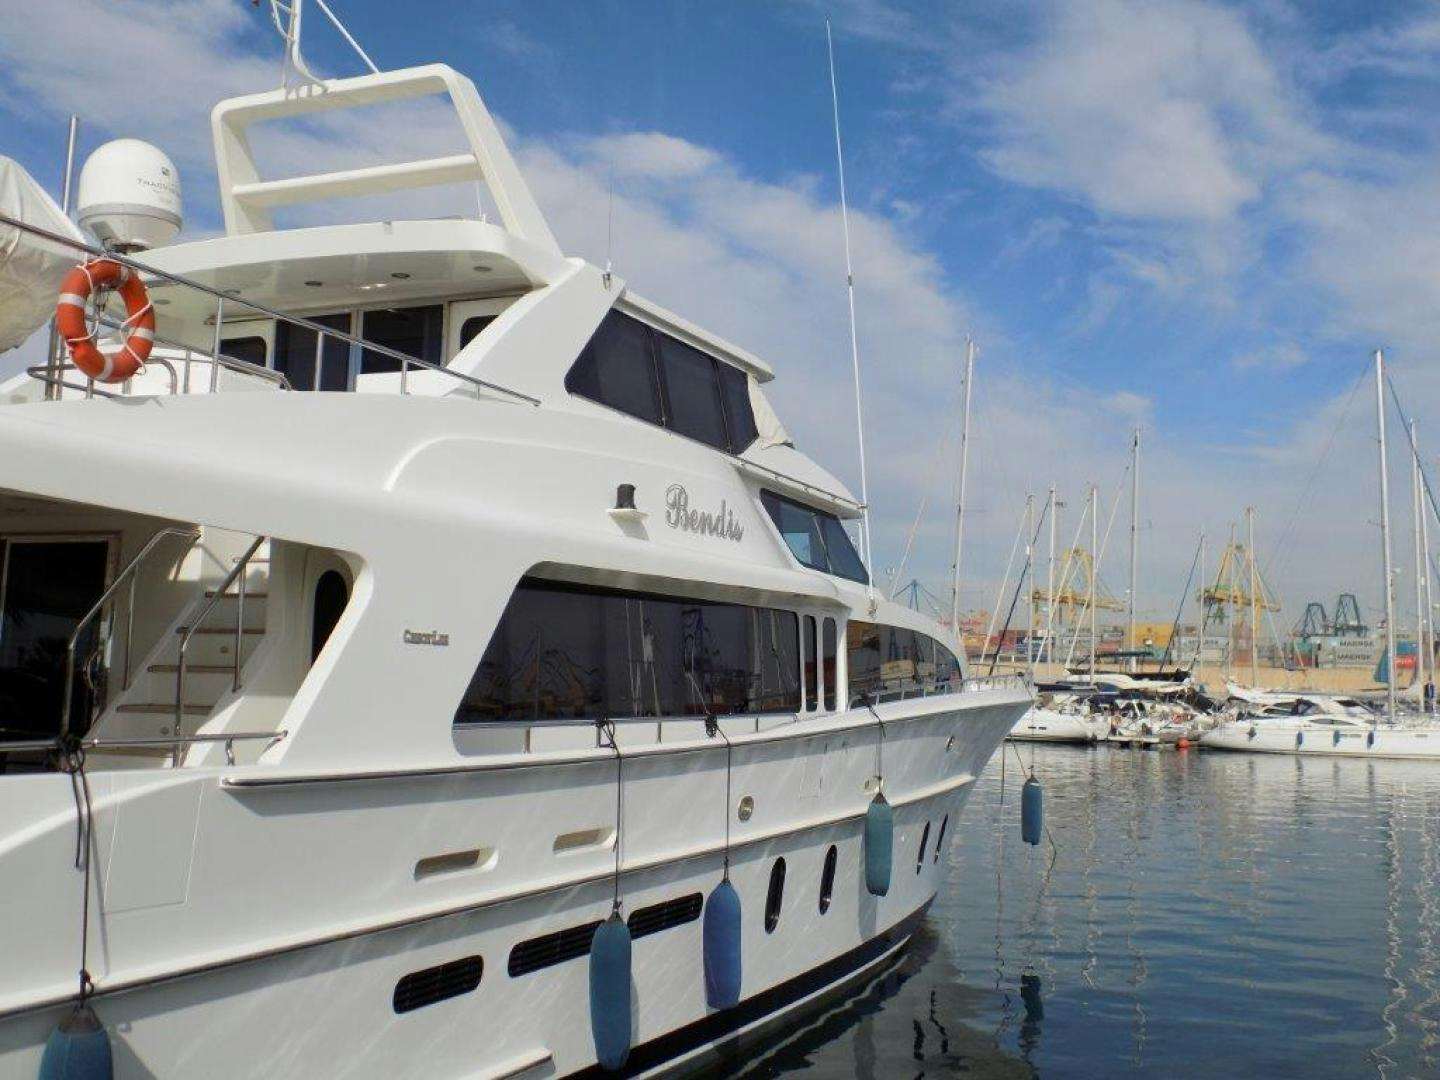 Bendis
Yacht for Sale